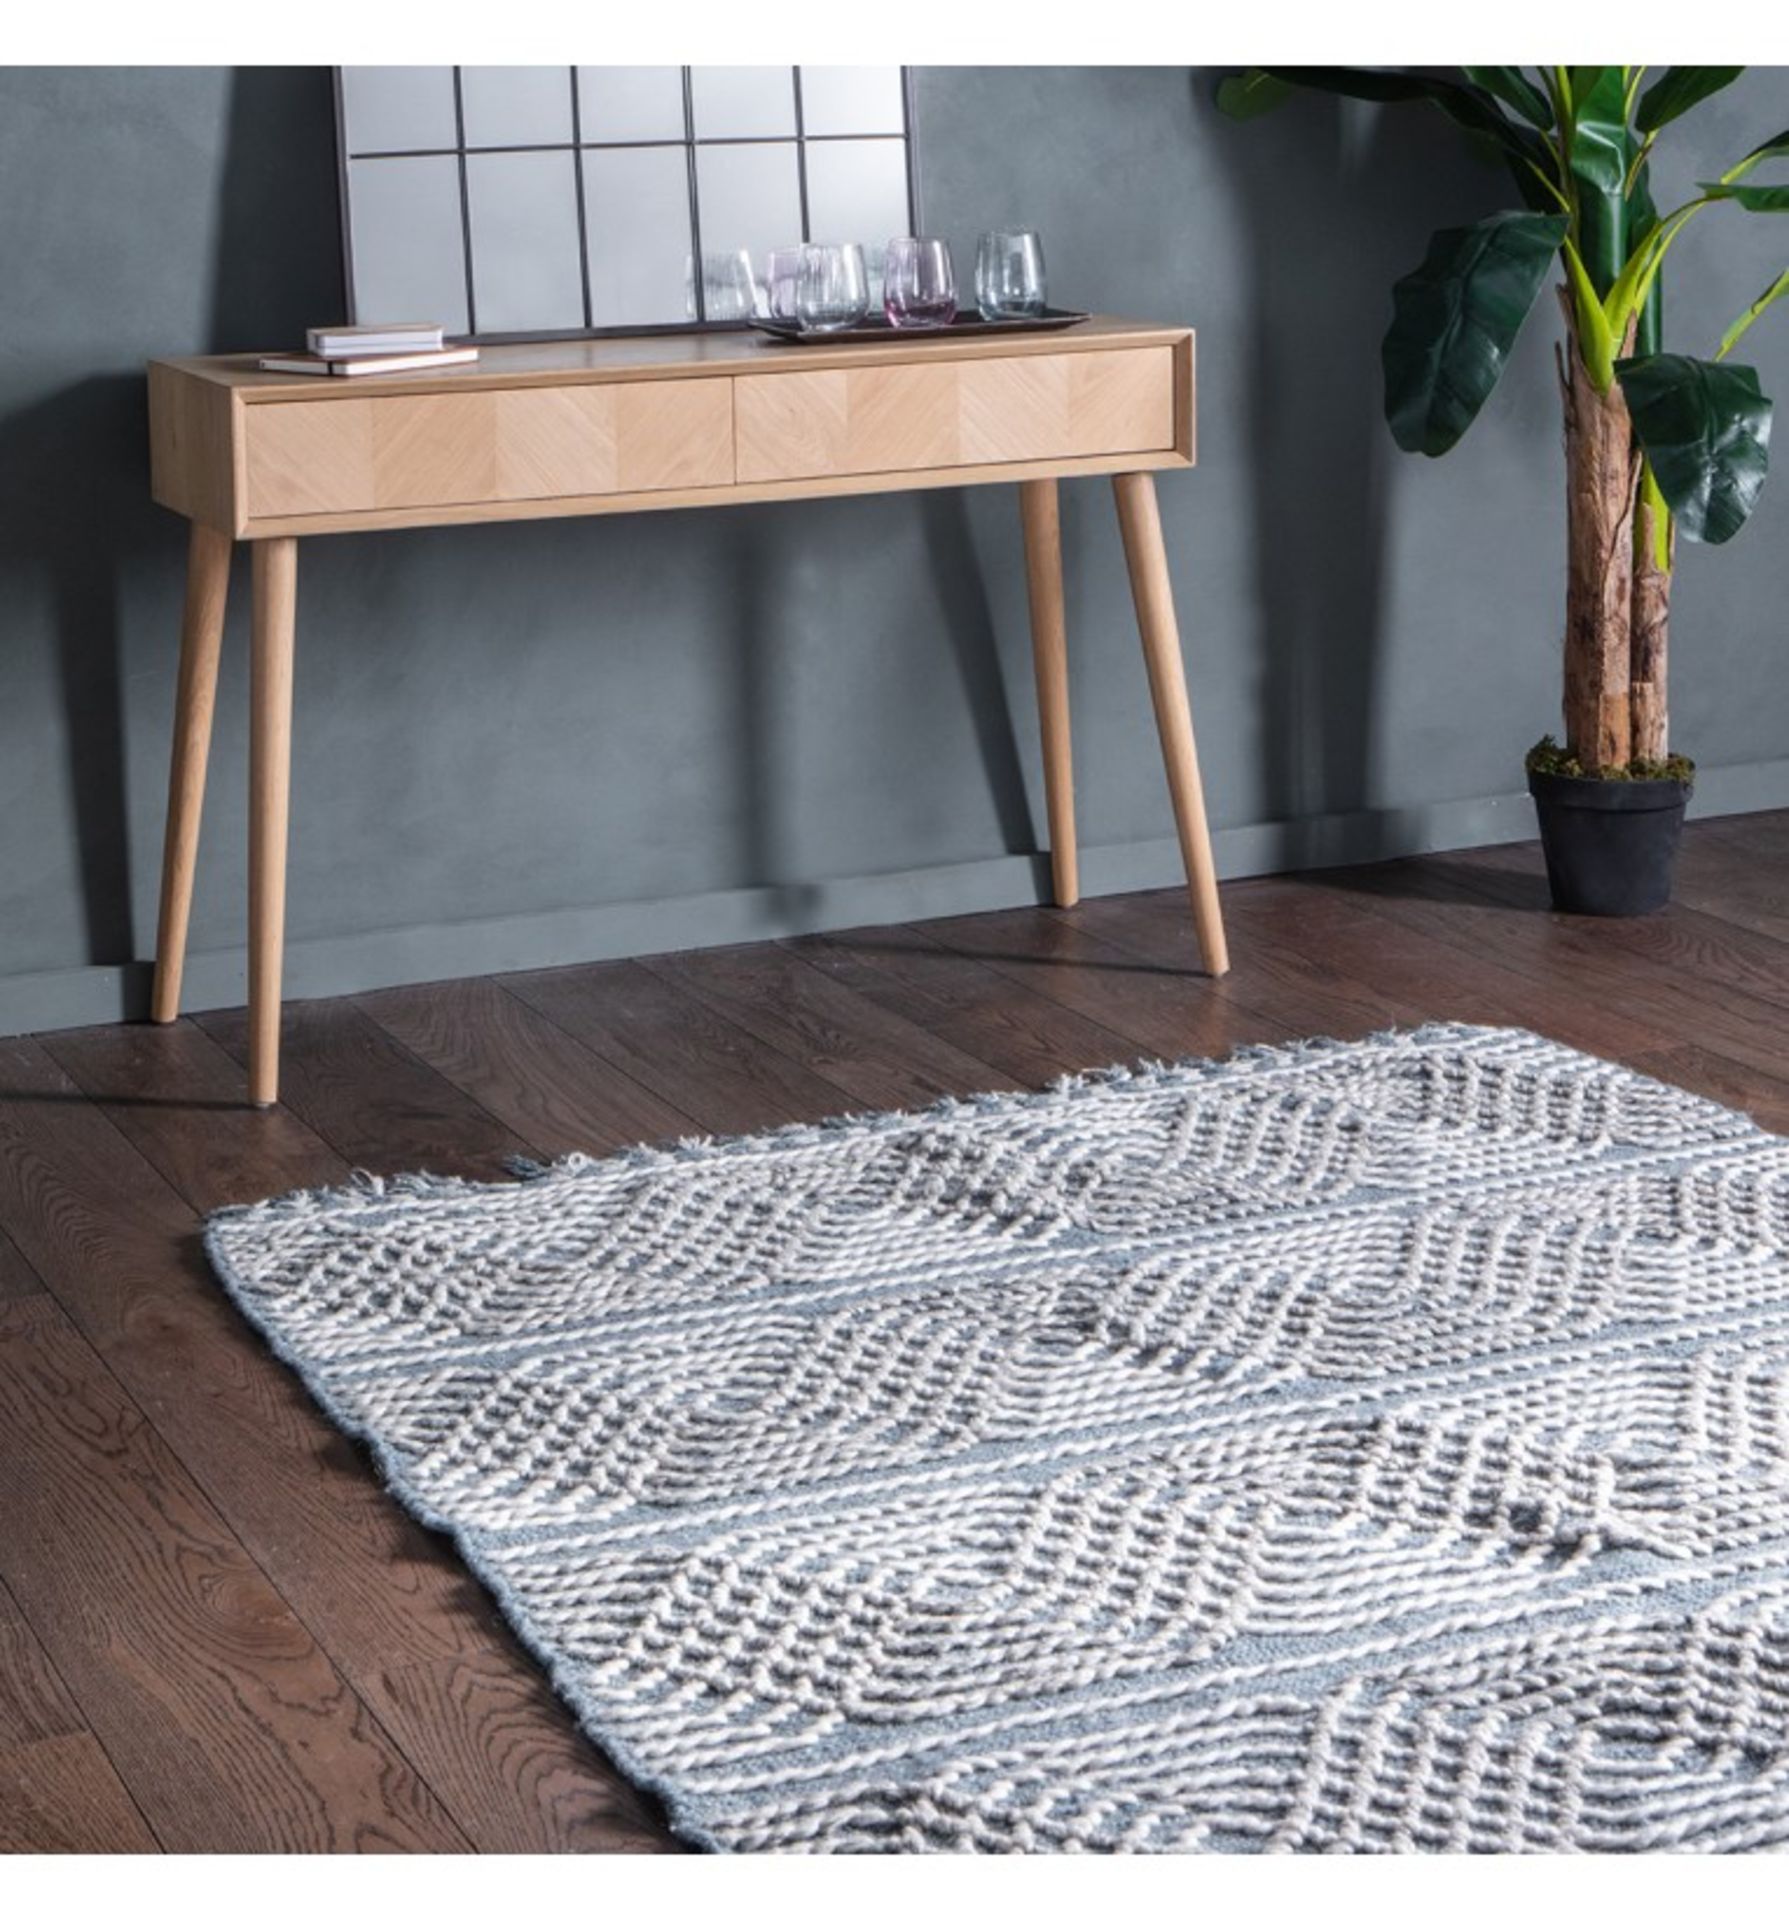 Lopez Rug Contemporary Handwoven Textured Rug In A Stylish Two Tone Geometric Pattern, With Co-